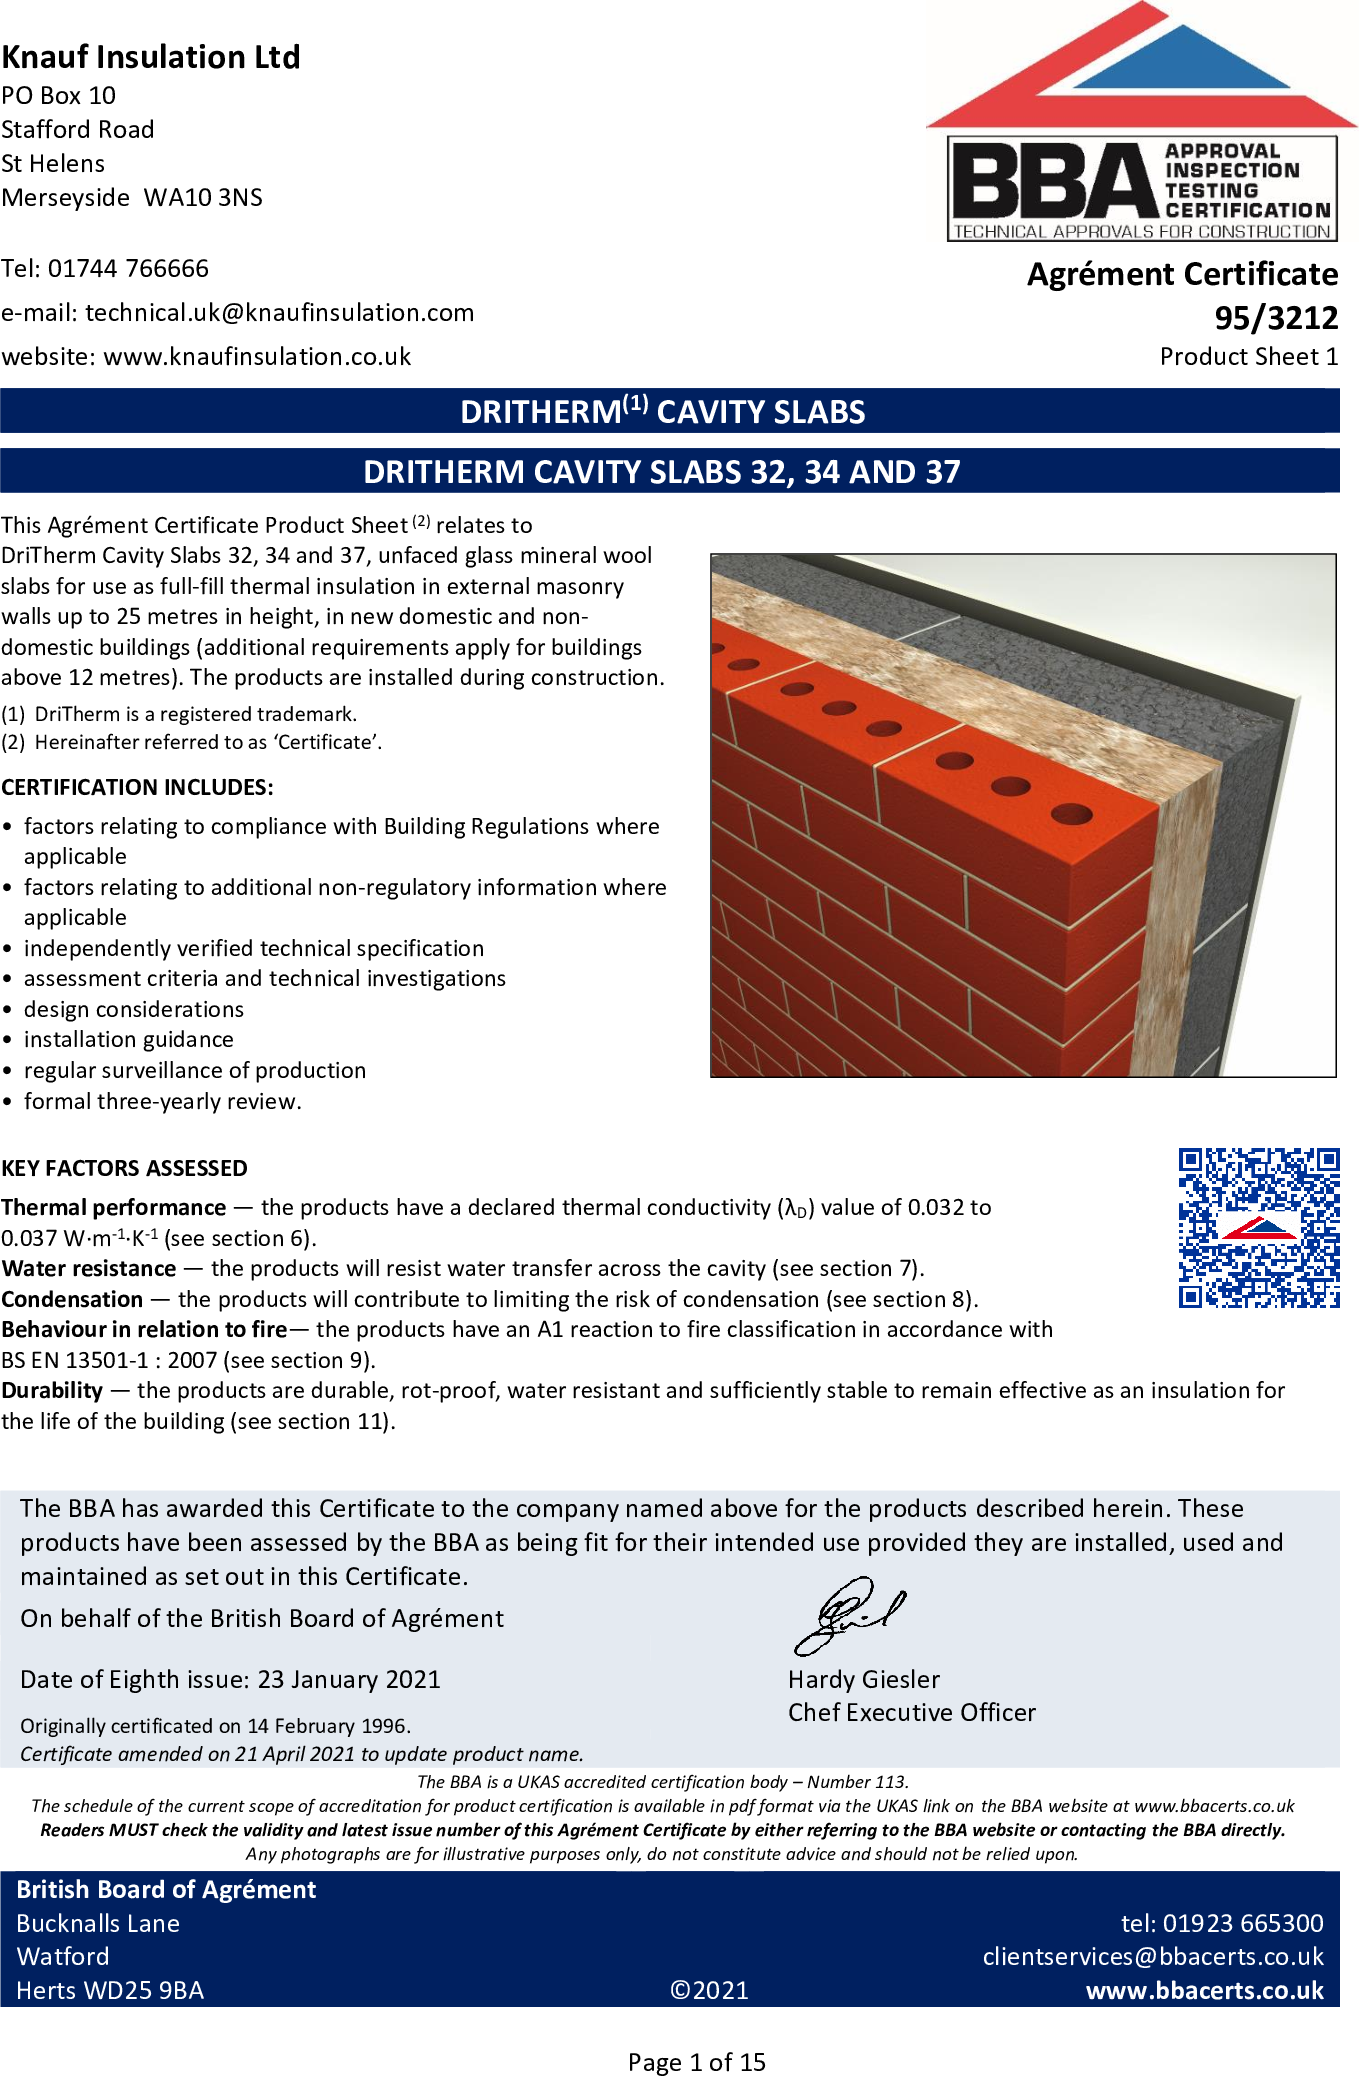 DriTherm Cavity Wall Slabs - BBA Certificate - 95/3212